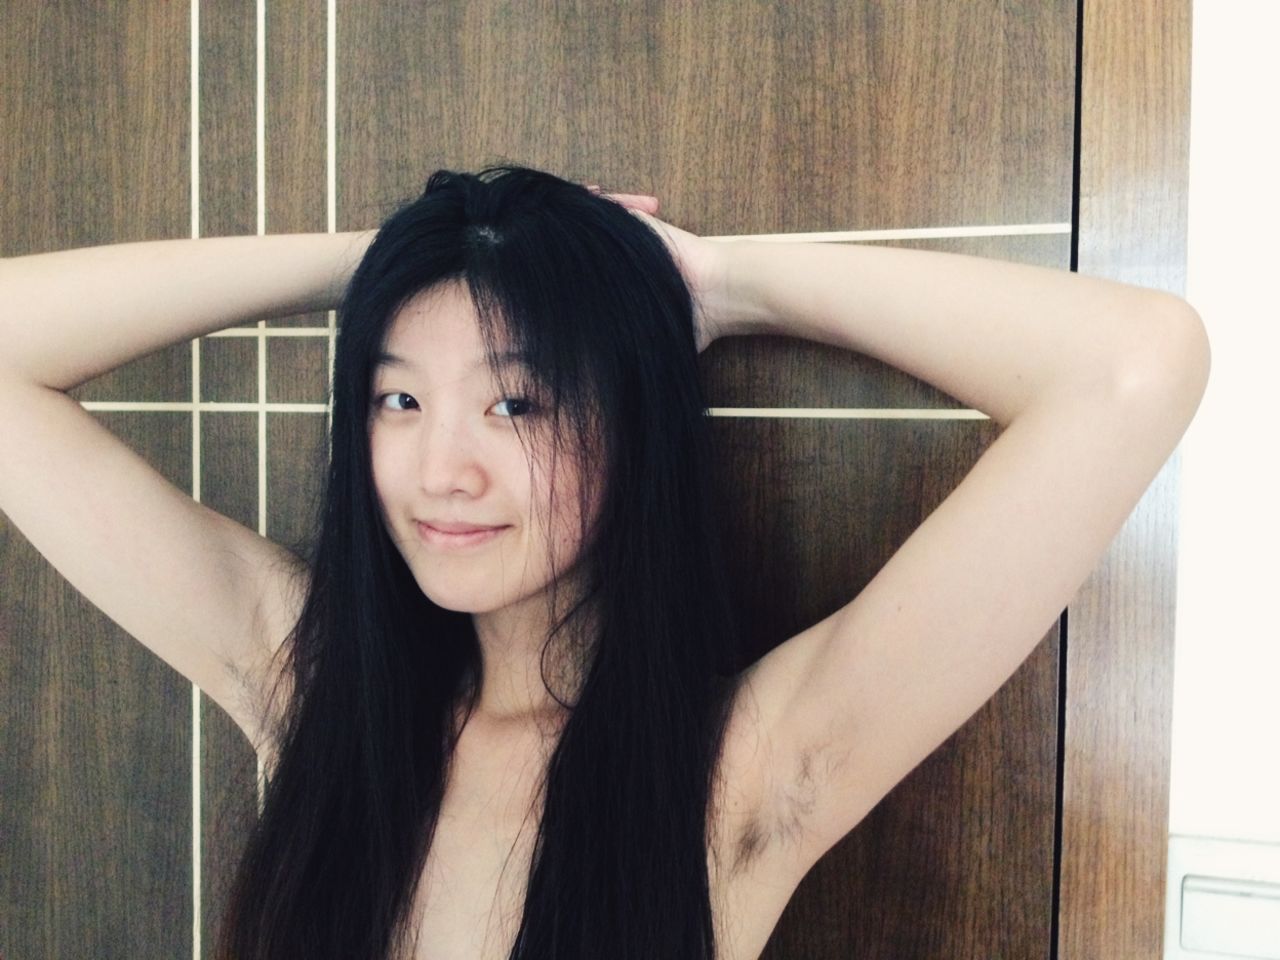 Mature Asian Forced Sex - Chinese feminists show off armpit hair in photo contest | CNN